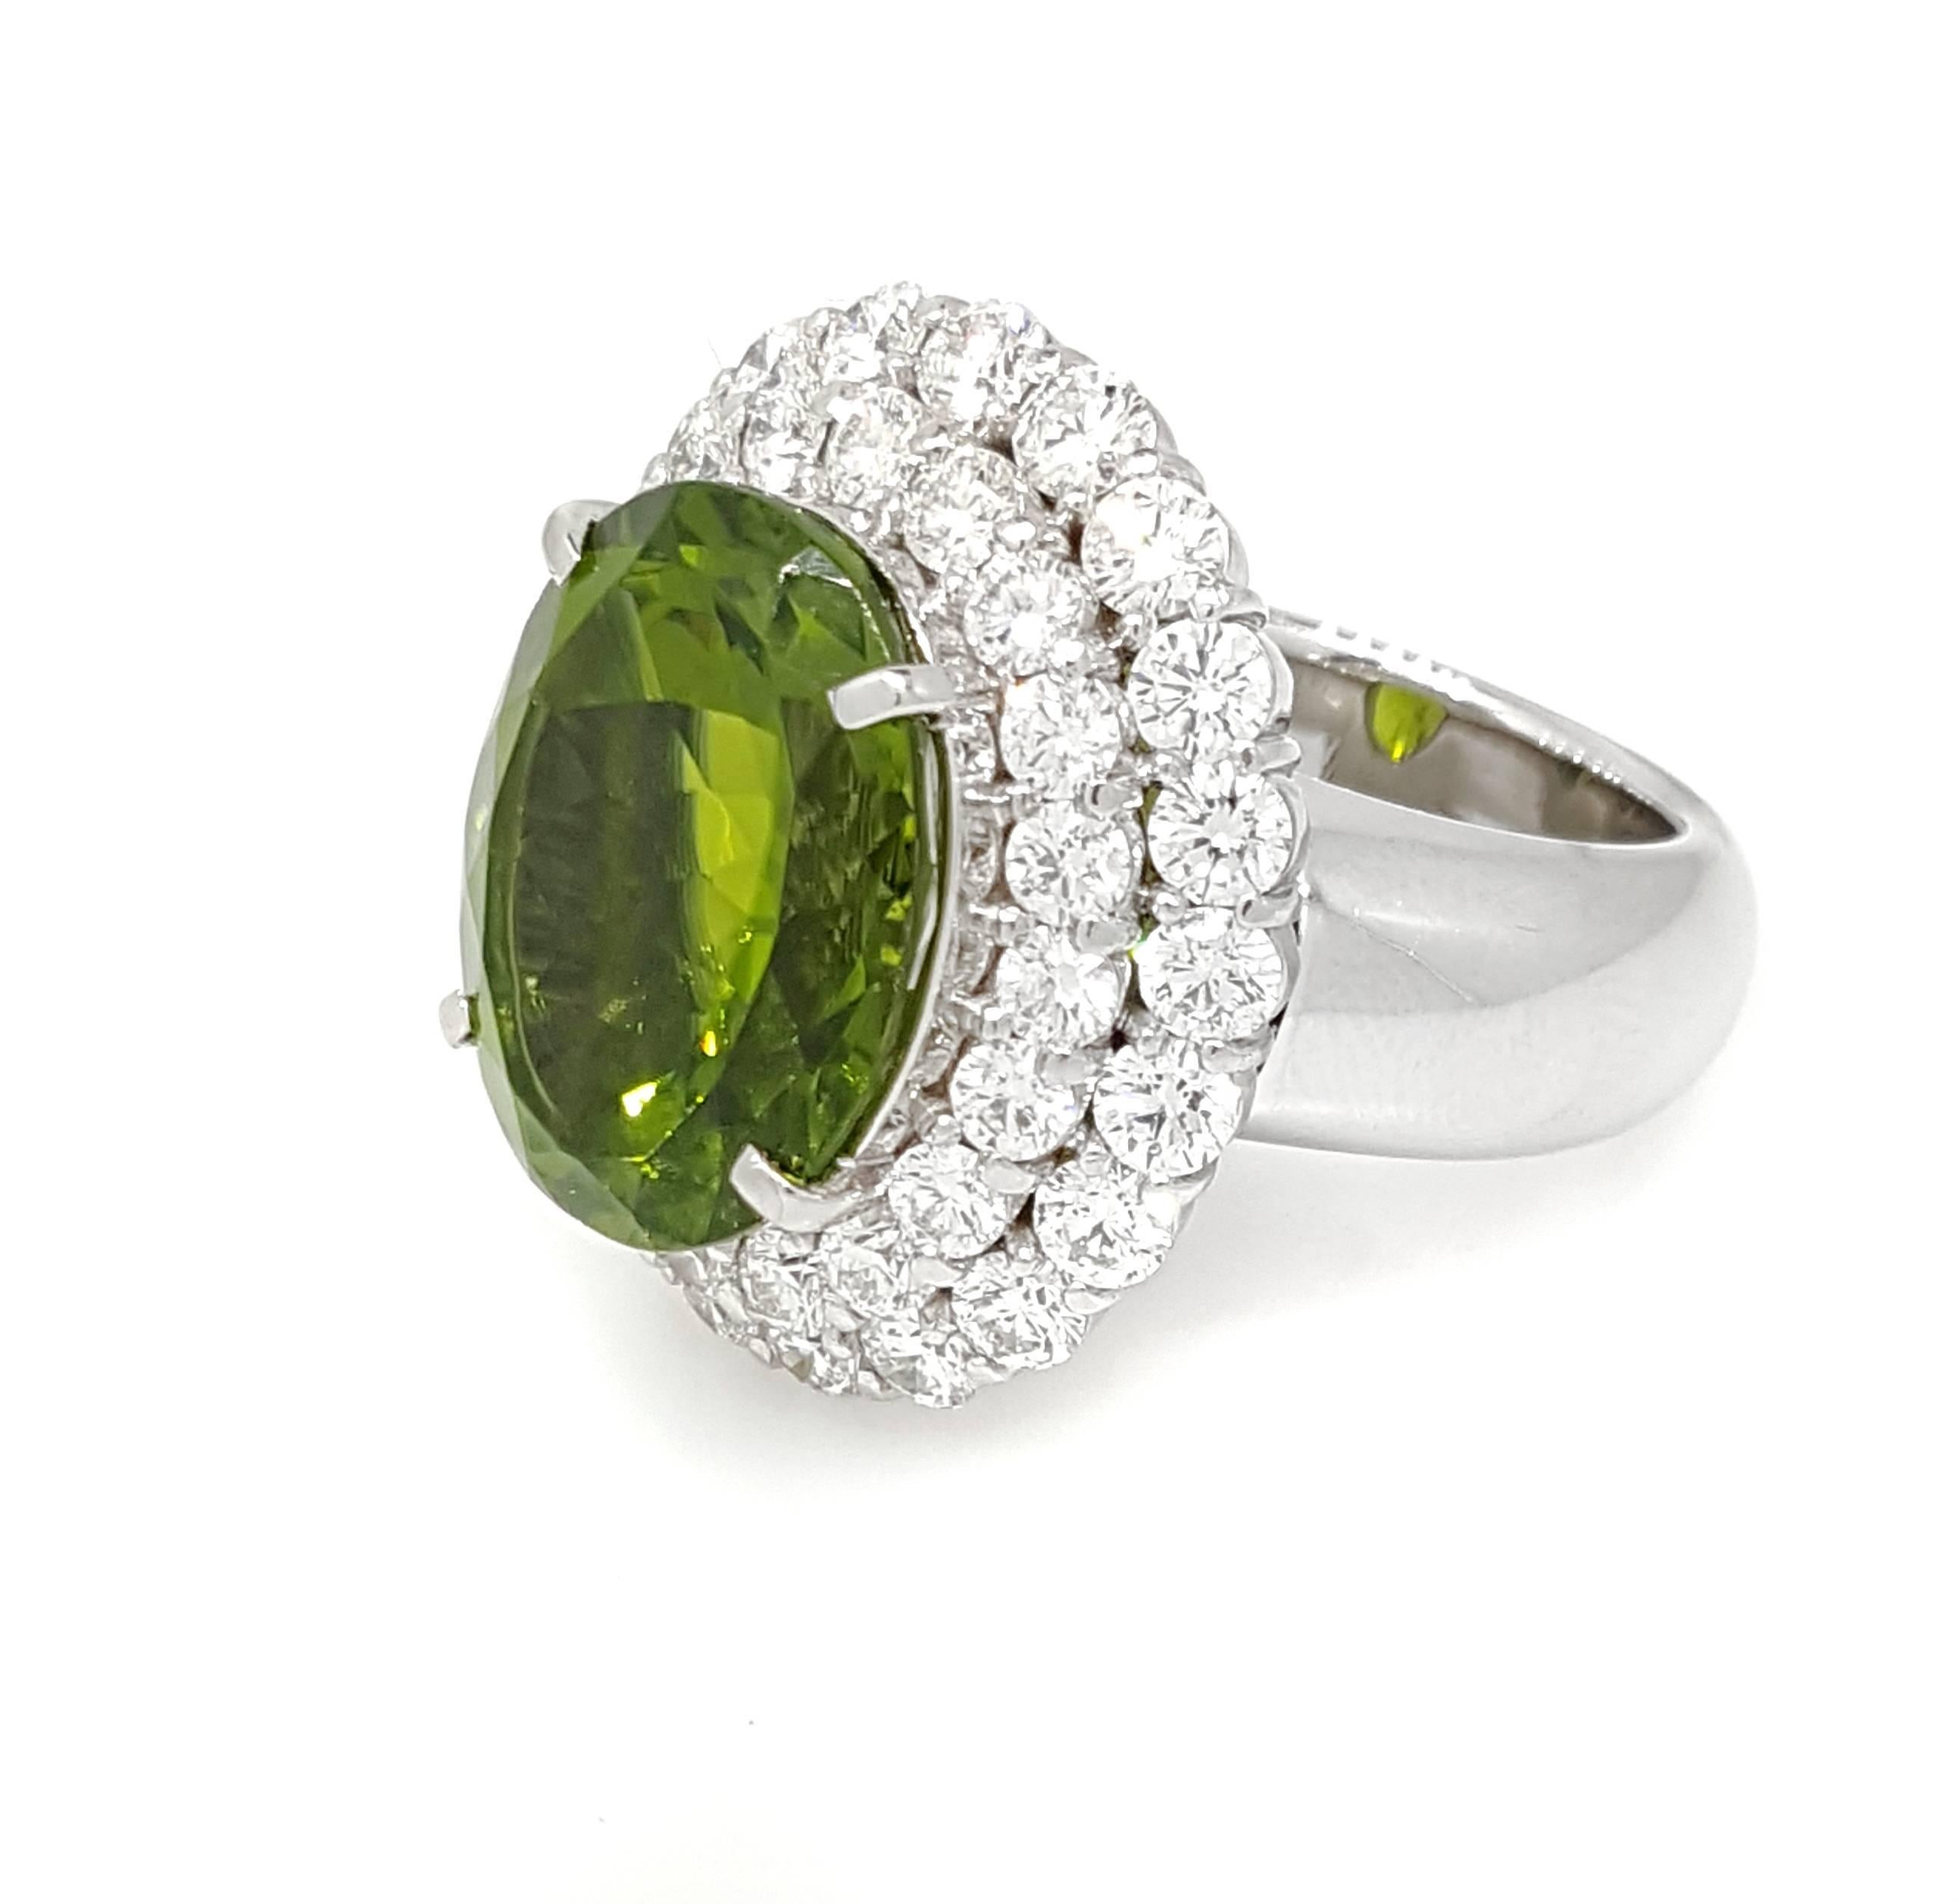 Large Oval Peridot Diamond Platinum Halo Ring In Excellent Condition For Sale In La Jolla, CA